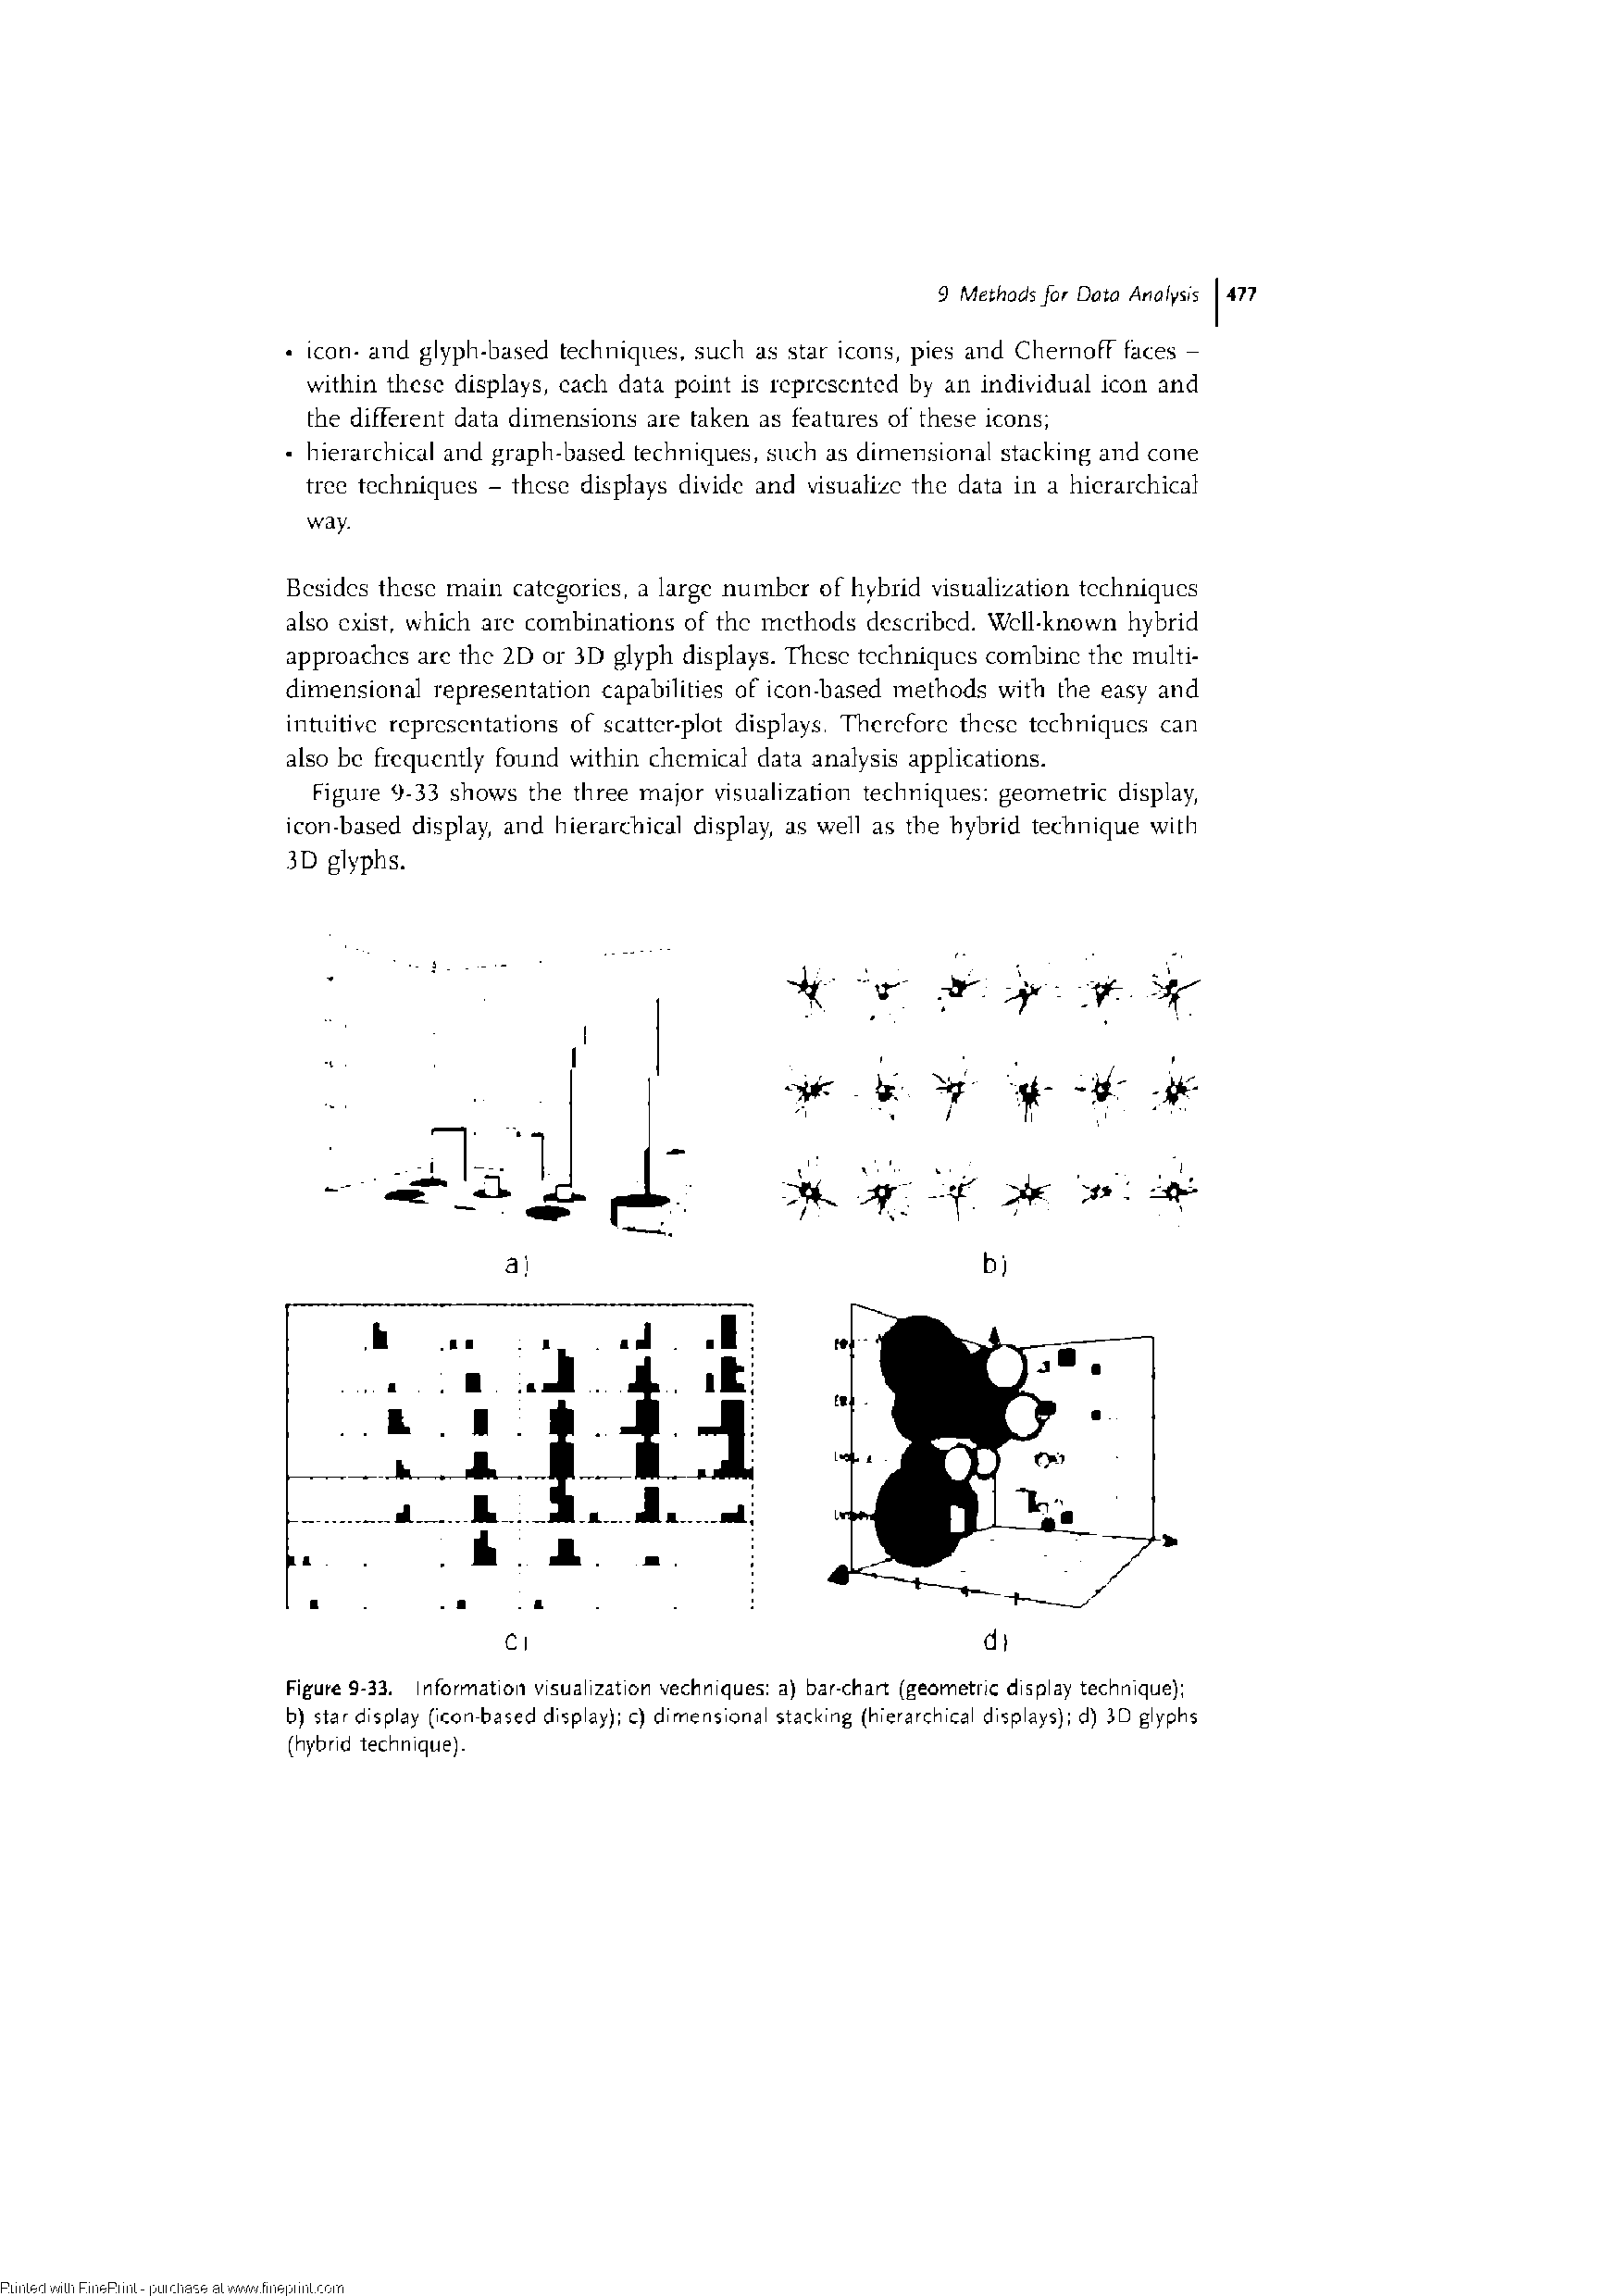 Figure 9-33. Information visualization vechniques a) bar-chari (geometric display technique) b) star display (icon-based display) c) dImen Ional stacking (hierarchical displays) d) JD glyphs (hybrid technique).